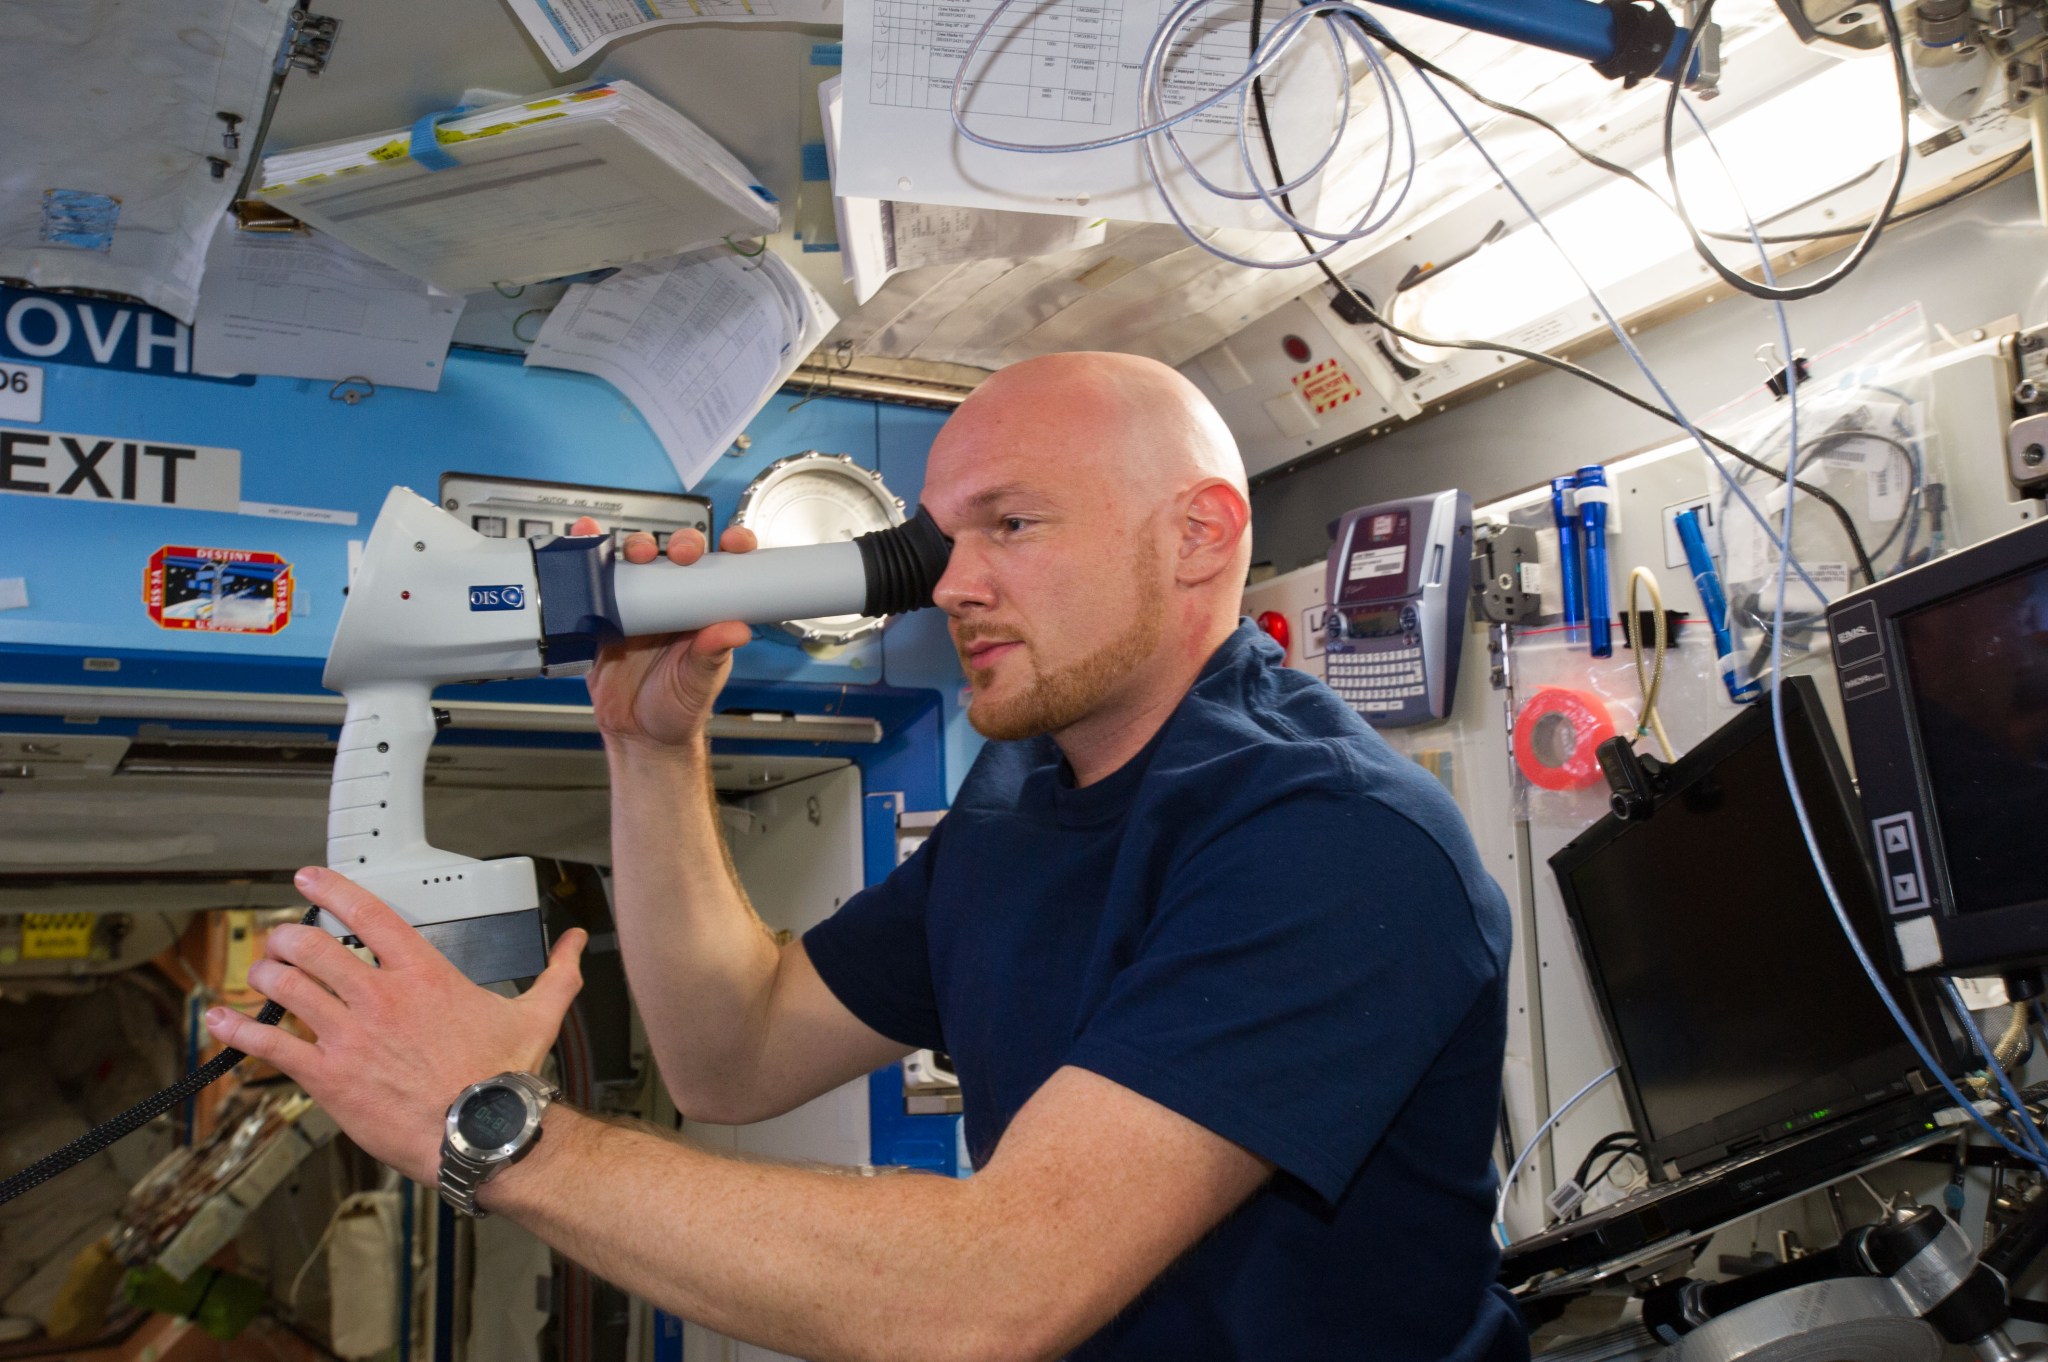 ESA astronaut Alexander Gerst conducts an exam for a previous investigation on eye health. A current study, ISAFE, also measures eye changes in space.